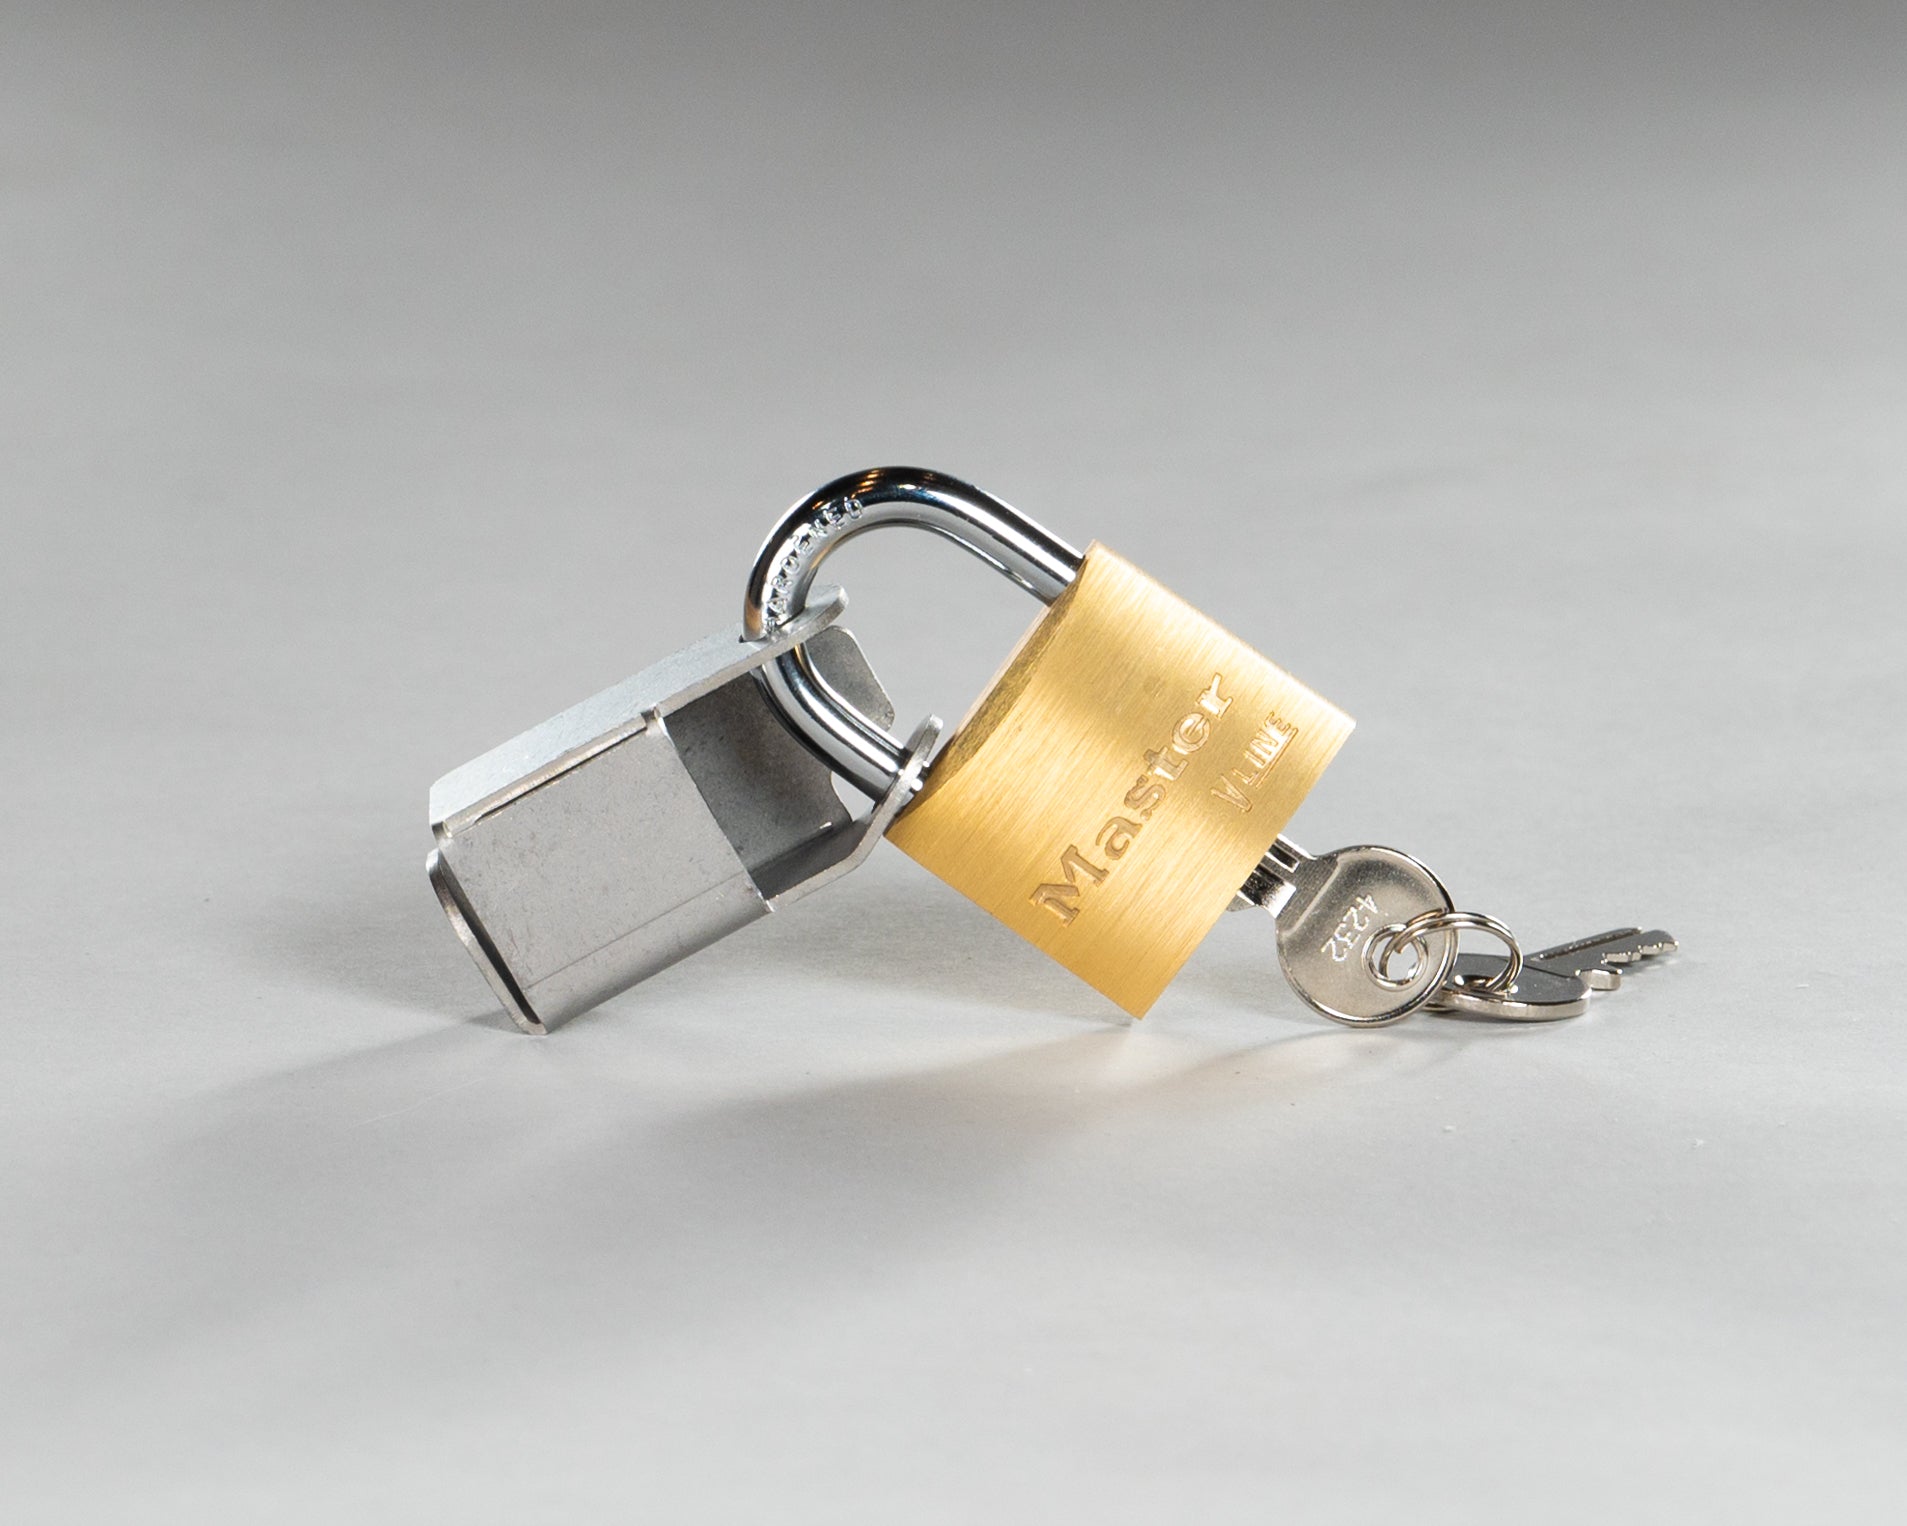 Padlock, with keys attached to the lock bracket